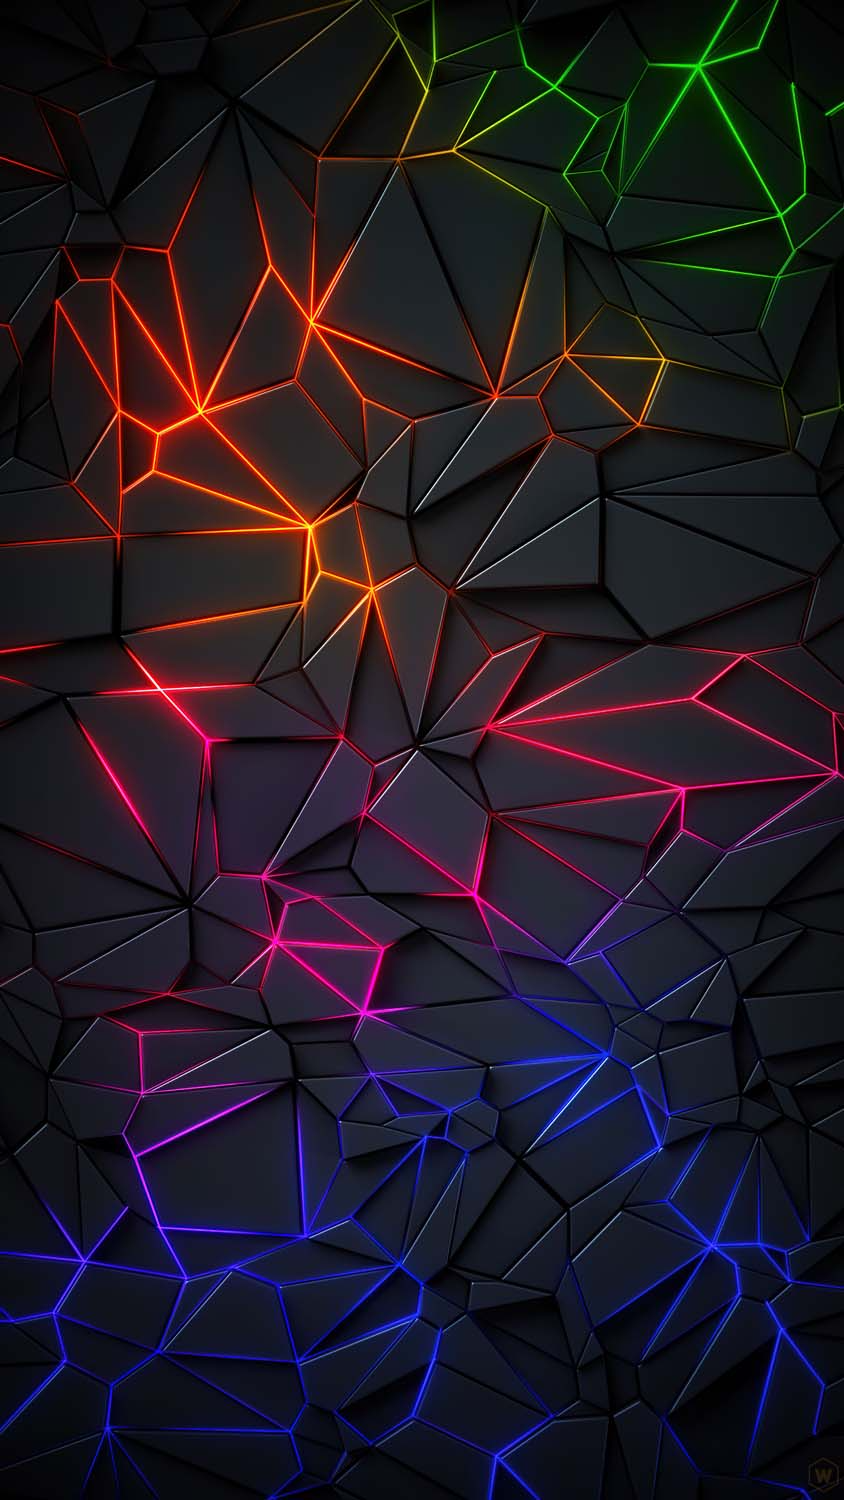 How to Apply 3D Wallpaper Effect on iPhone